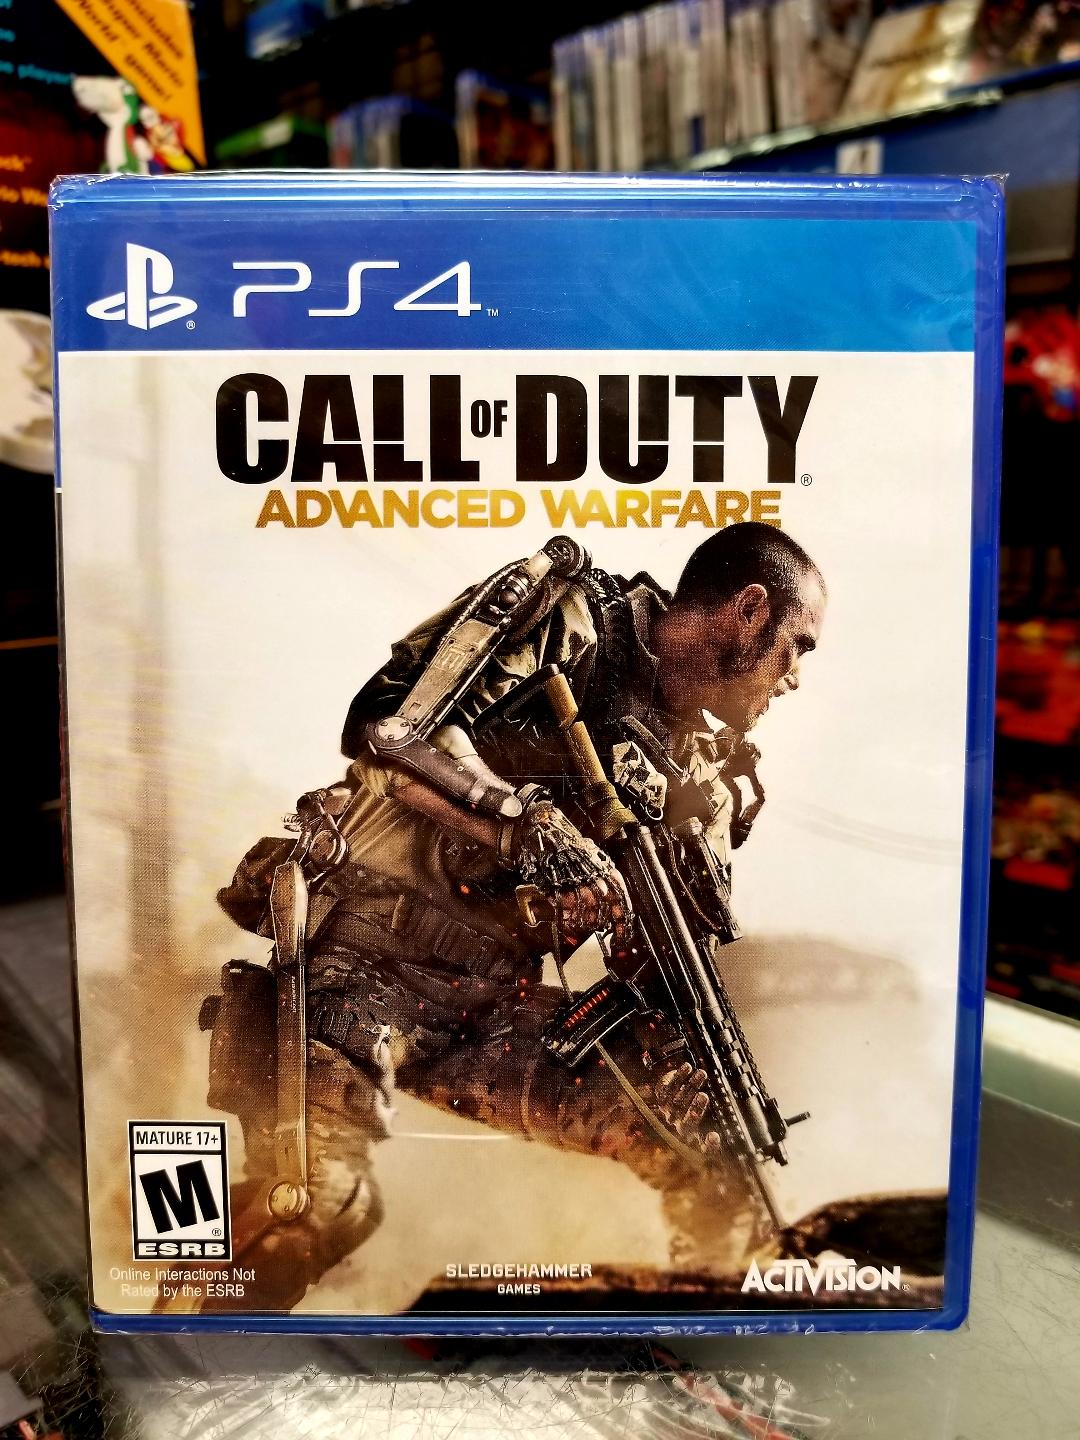 What's the Best Price for Call of Duty: Advanced Warfare PS4 in